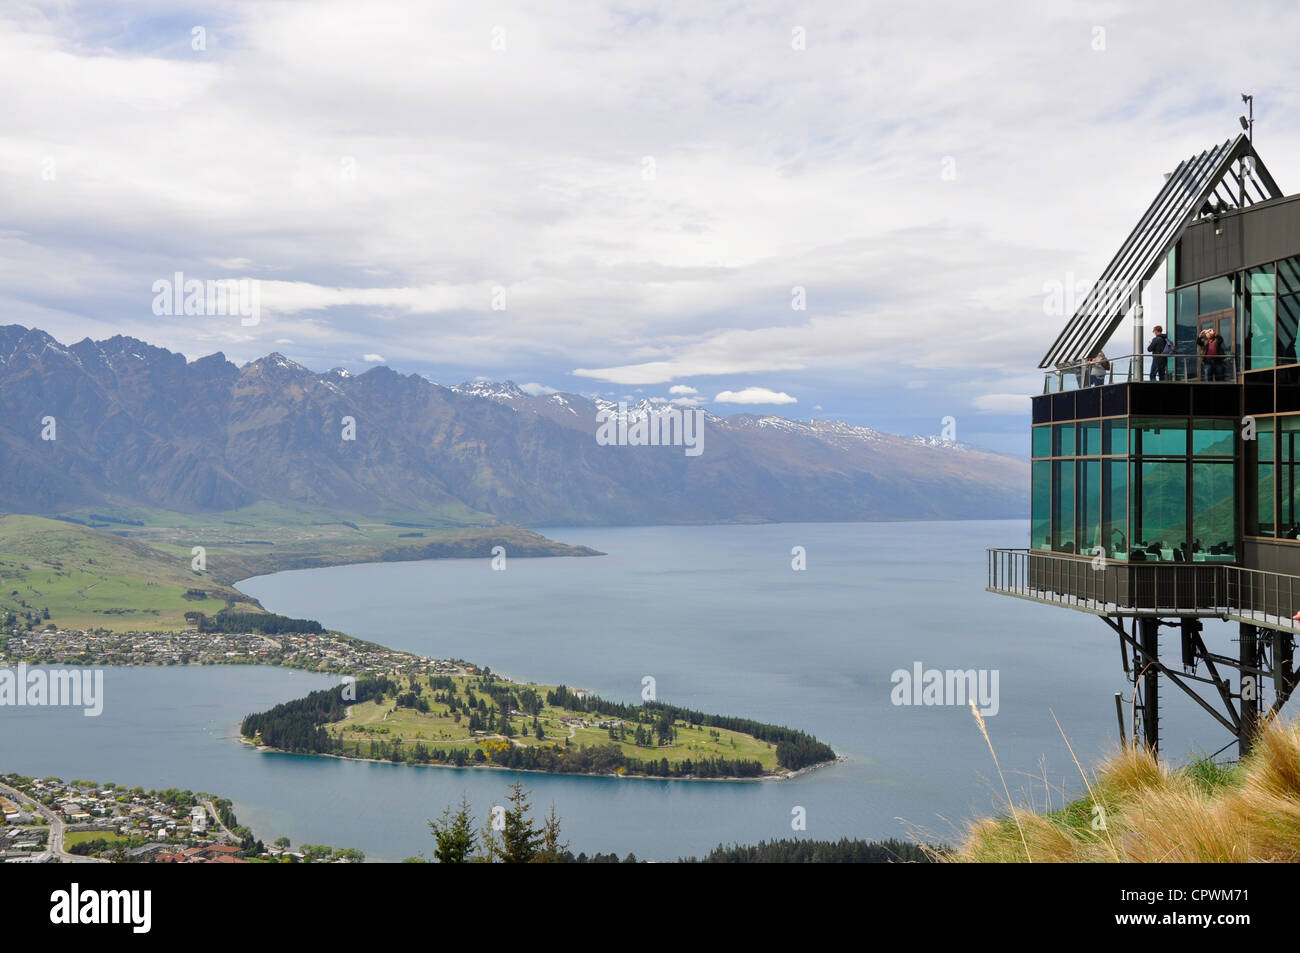 View across Queenstown, Lake Wakatipu and The Remarkables from the Skyline tourist complex New Zealand Stock Photo